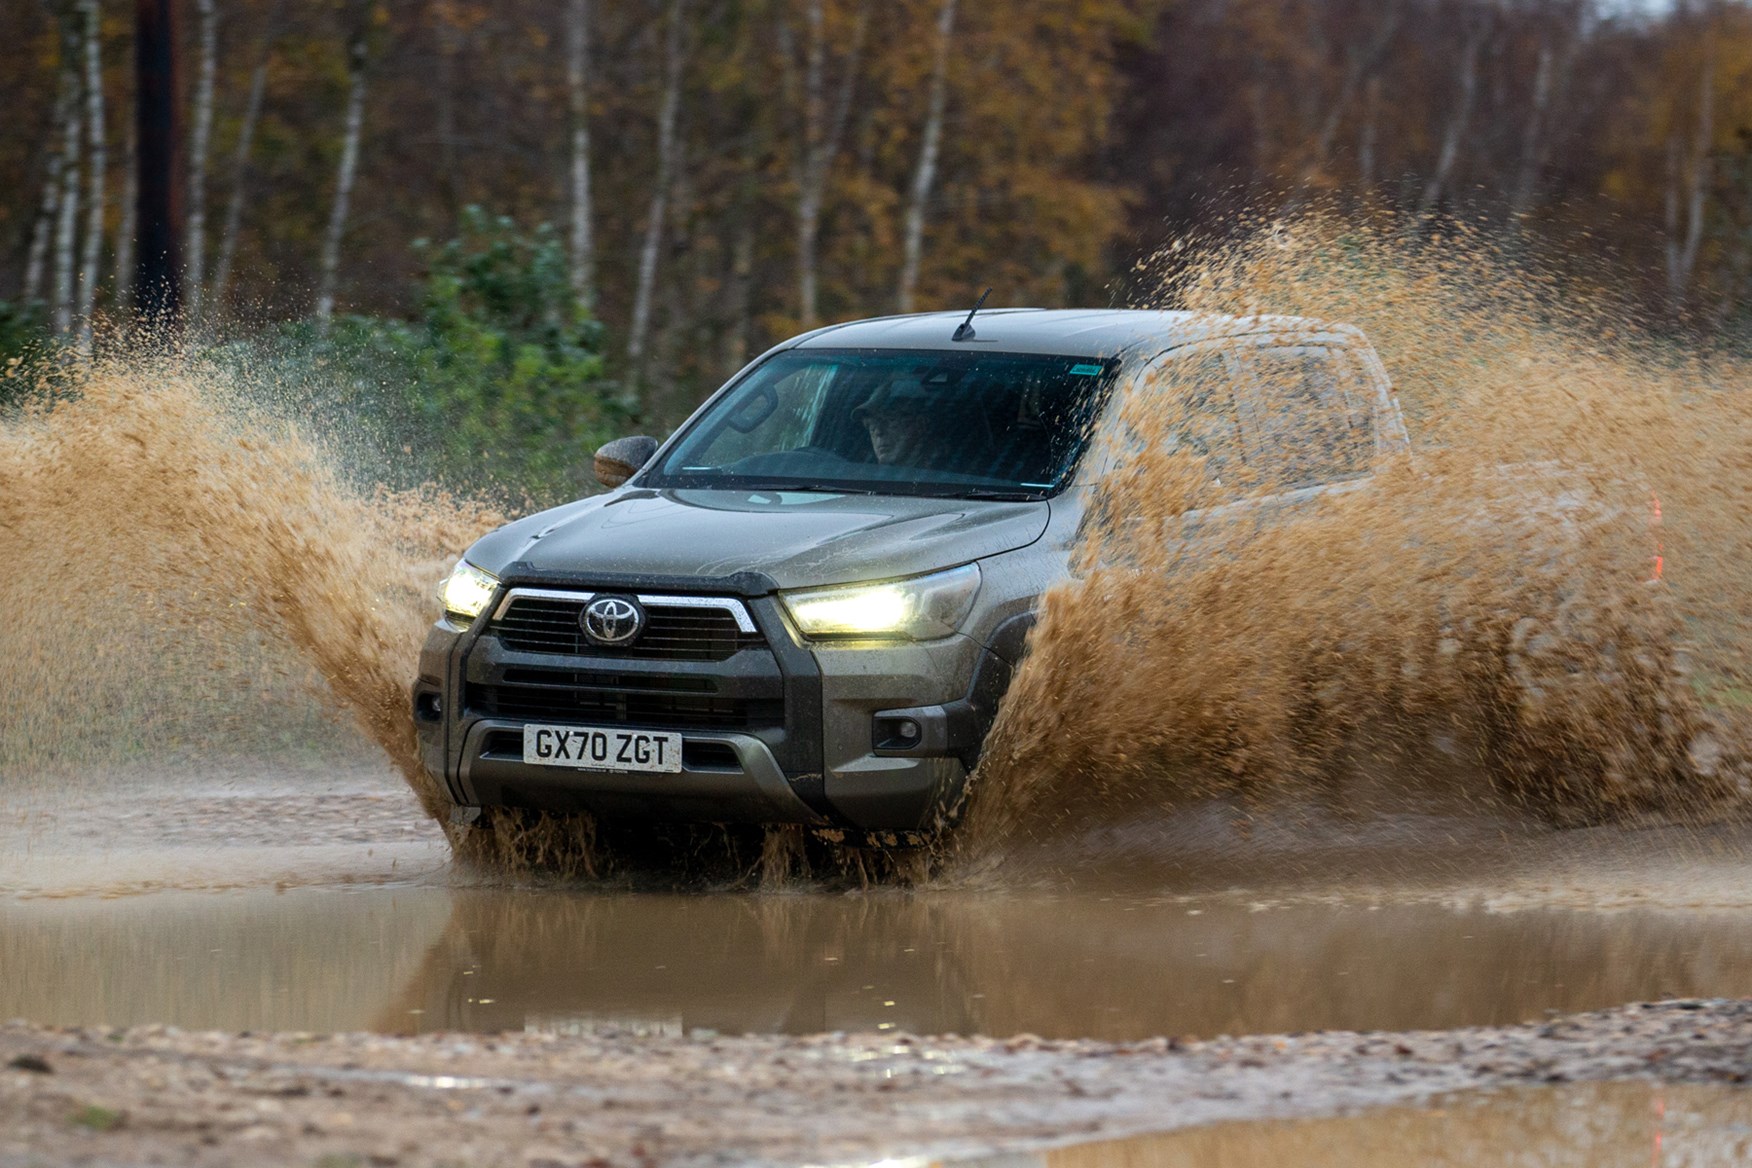 Toyota Hilux review, 2020 facelift, front view, big splash through muddy water, bronze